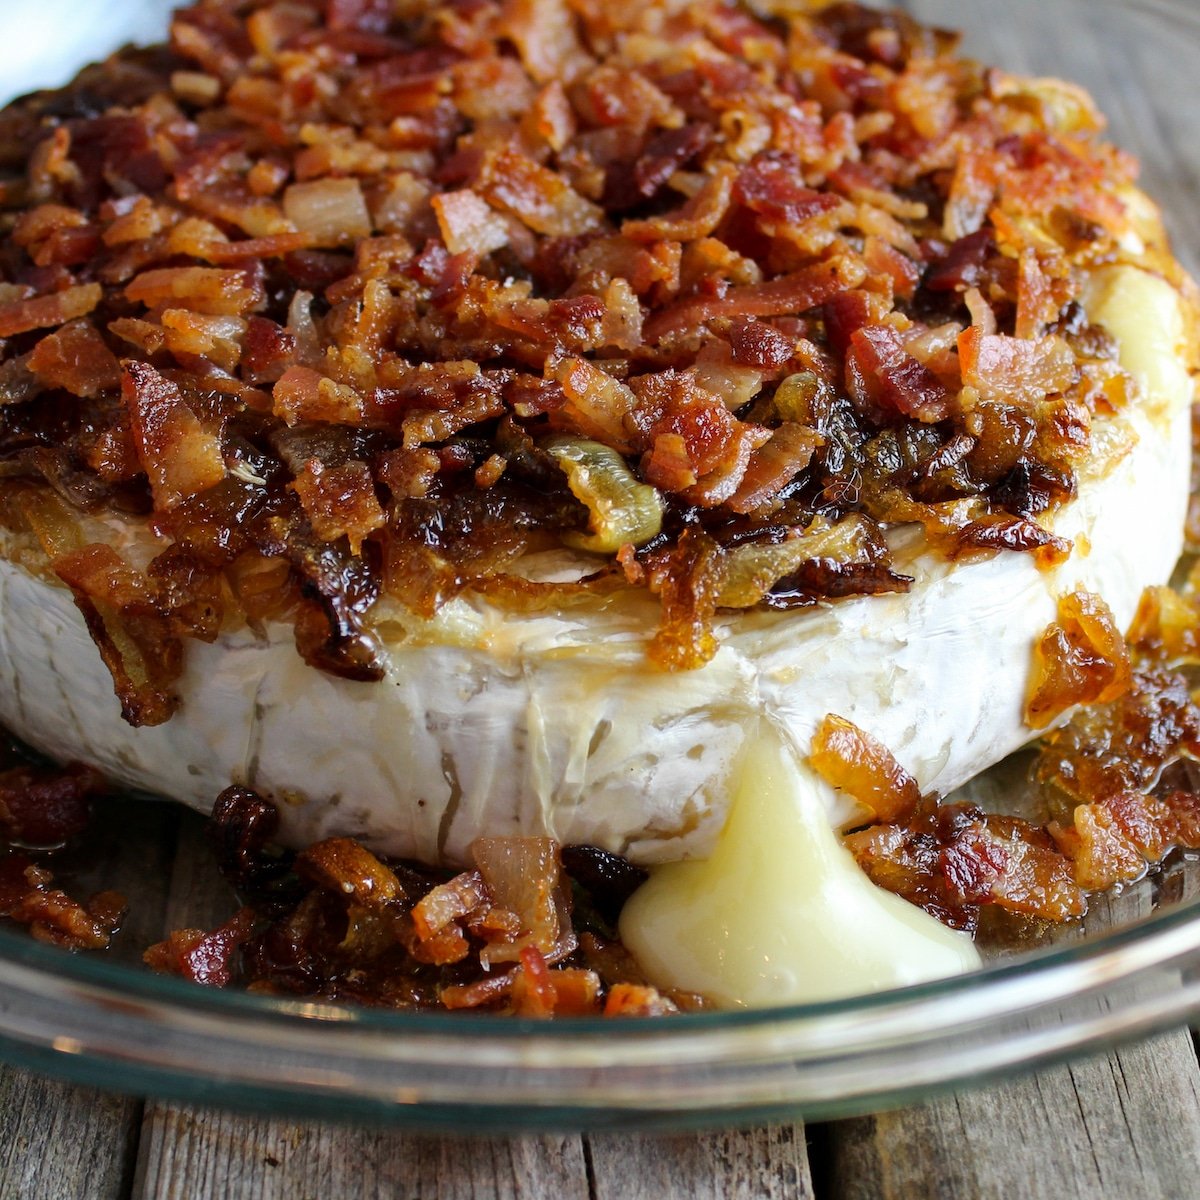 https://tasteandsee.com/wp-content/uploads/2022/11/1200x1200-Baked-Brie-with-Caramelized-Onions-and-Bacon.jpg